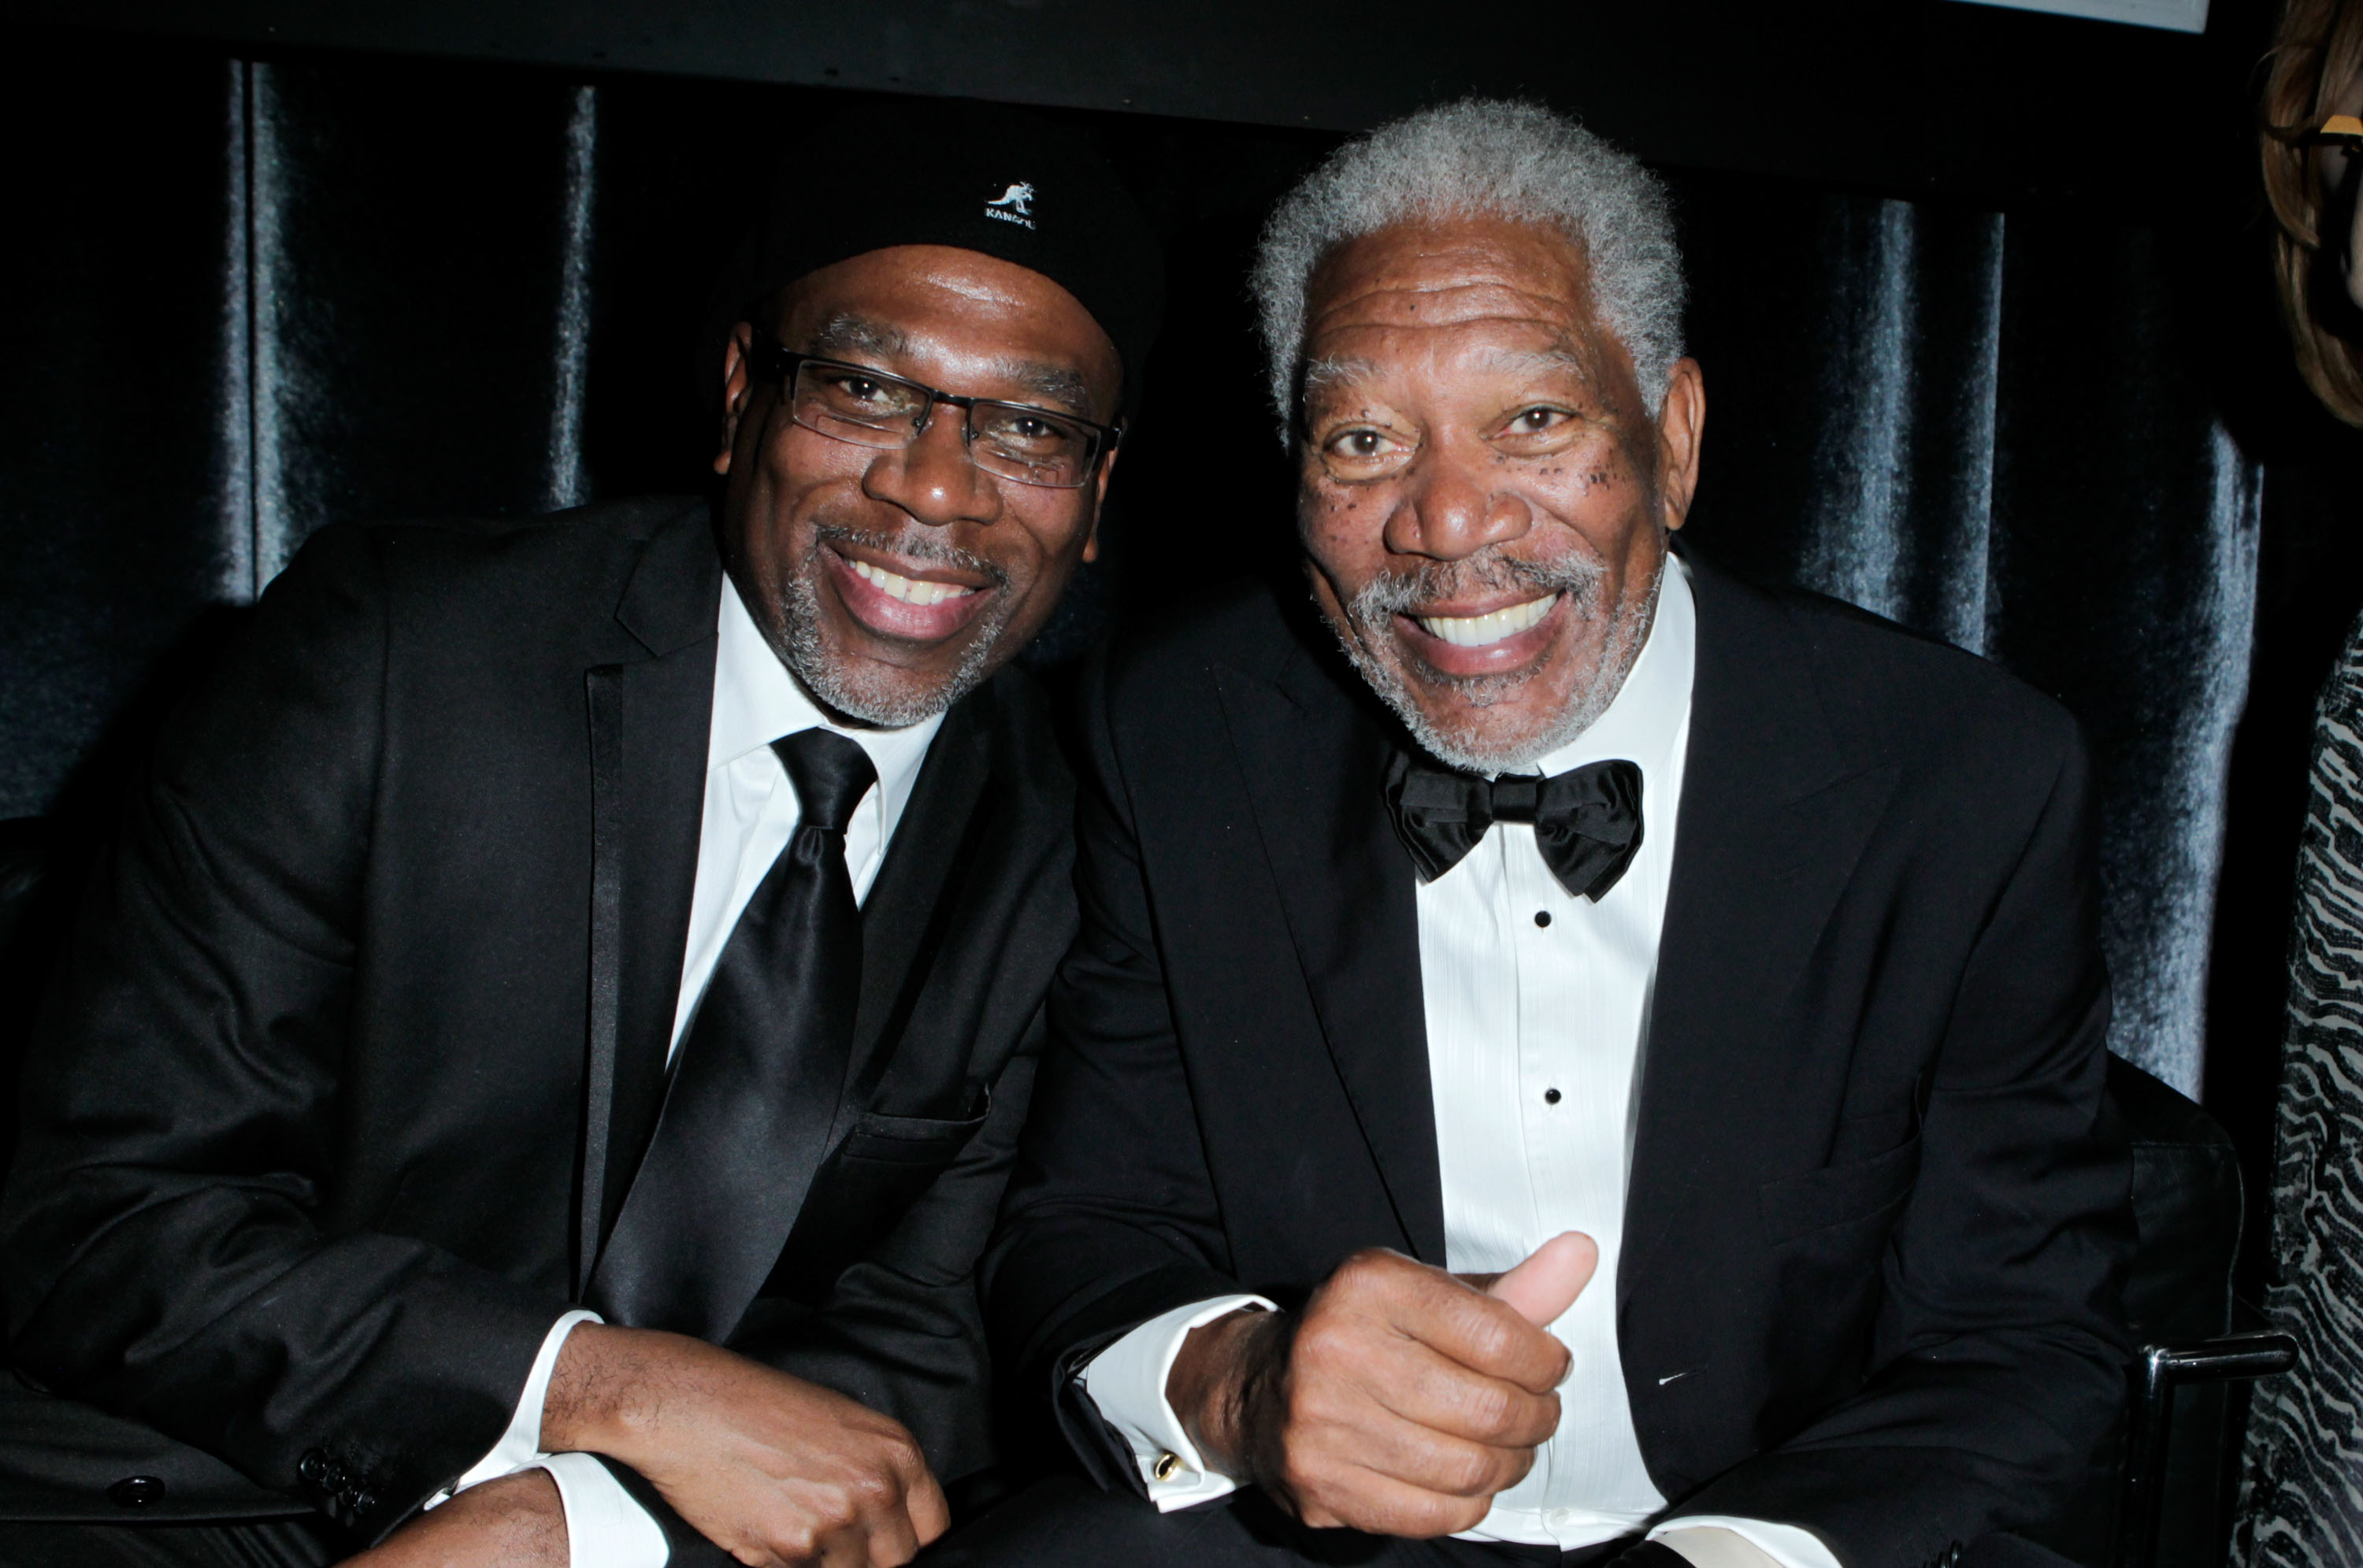 Alfonso and Morgan Freeman at the Golden Globe Awards after-party in Beverly Hills, California on January 15, 2012 | Source: Getty Images